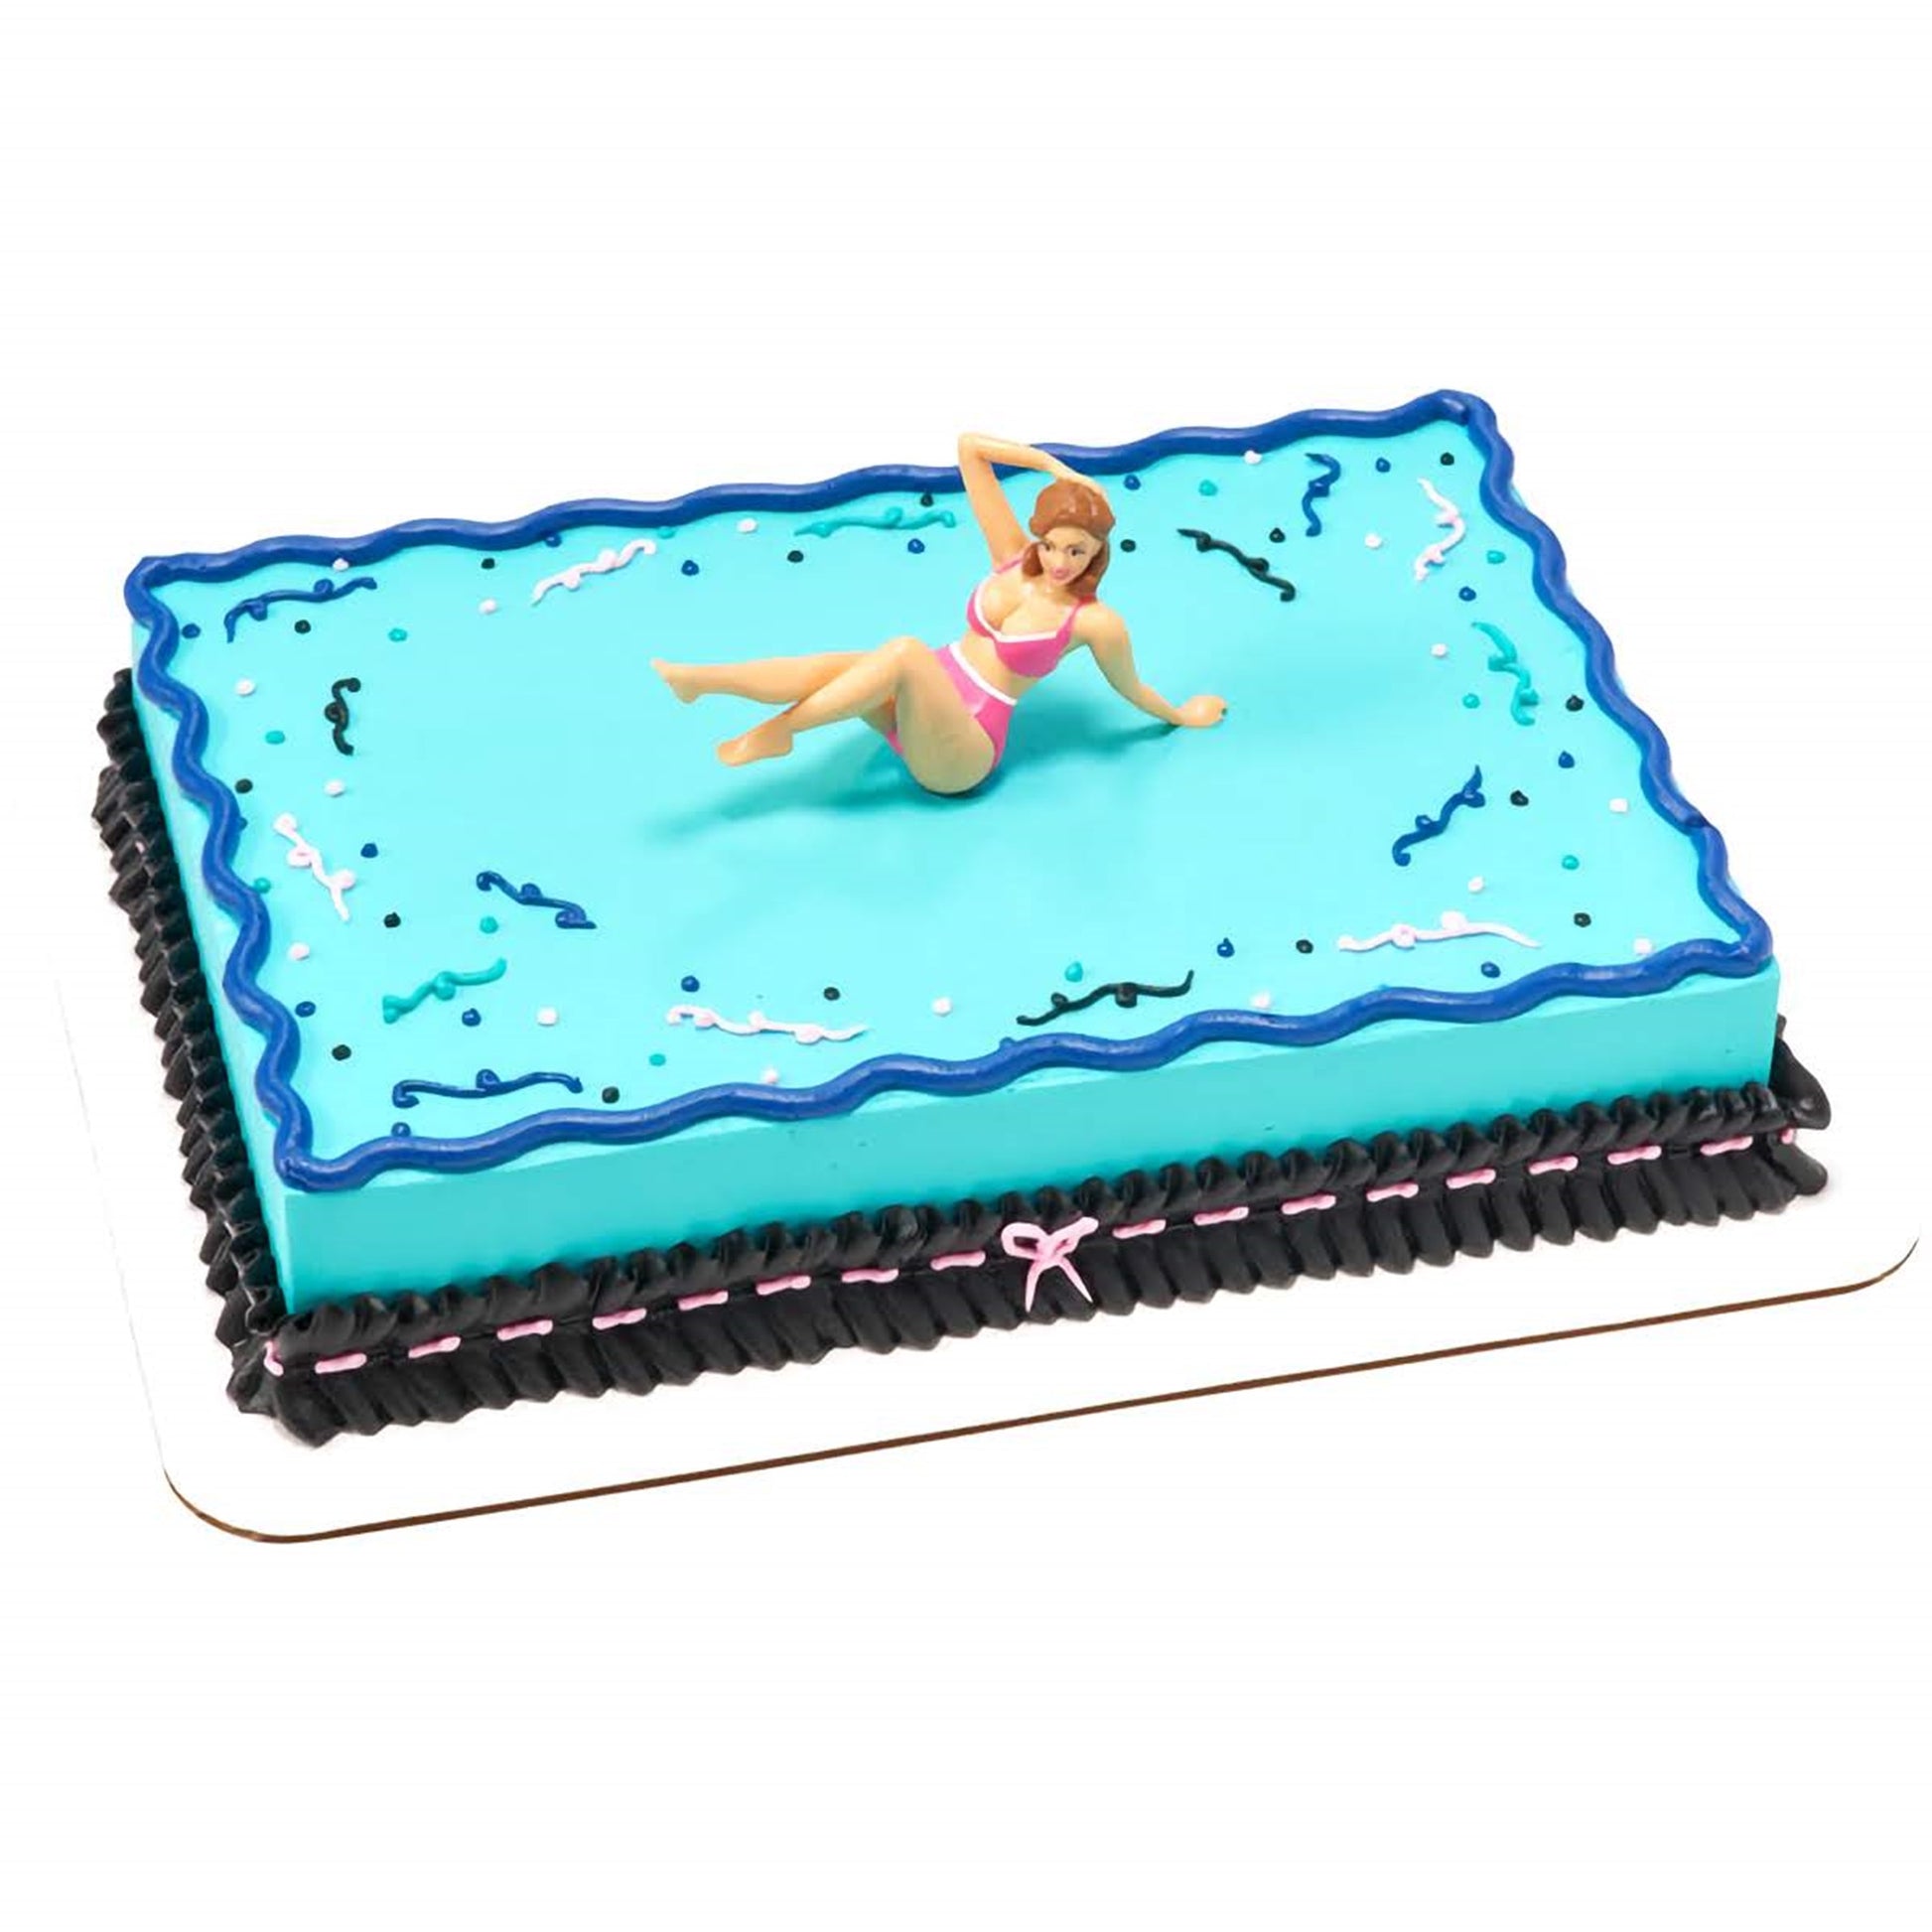 A cake featuring a figure of a woman in a pink bikini, reclining on a vivid turquoise icing with a wavy border design. This novelty cake from Lynn's Cake, Candy, and Chocolate Supplies is a fitting centerpiece for a beach party or a playful birthday celebration.